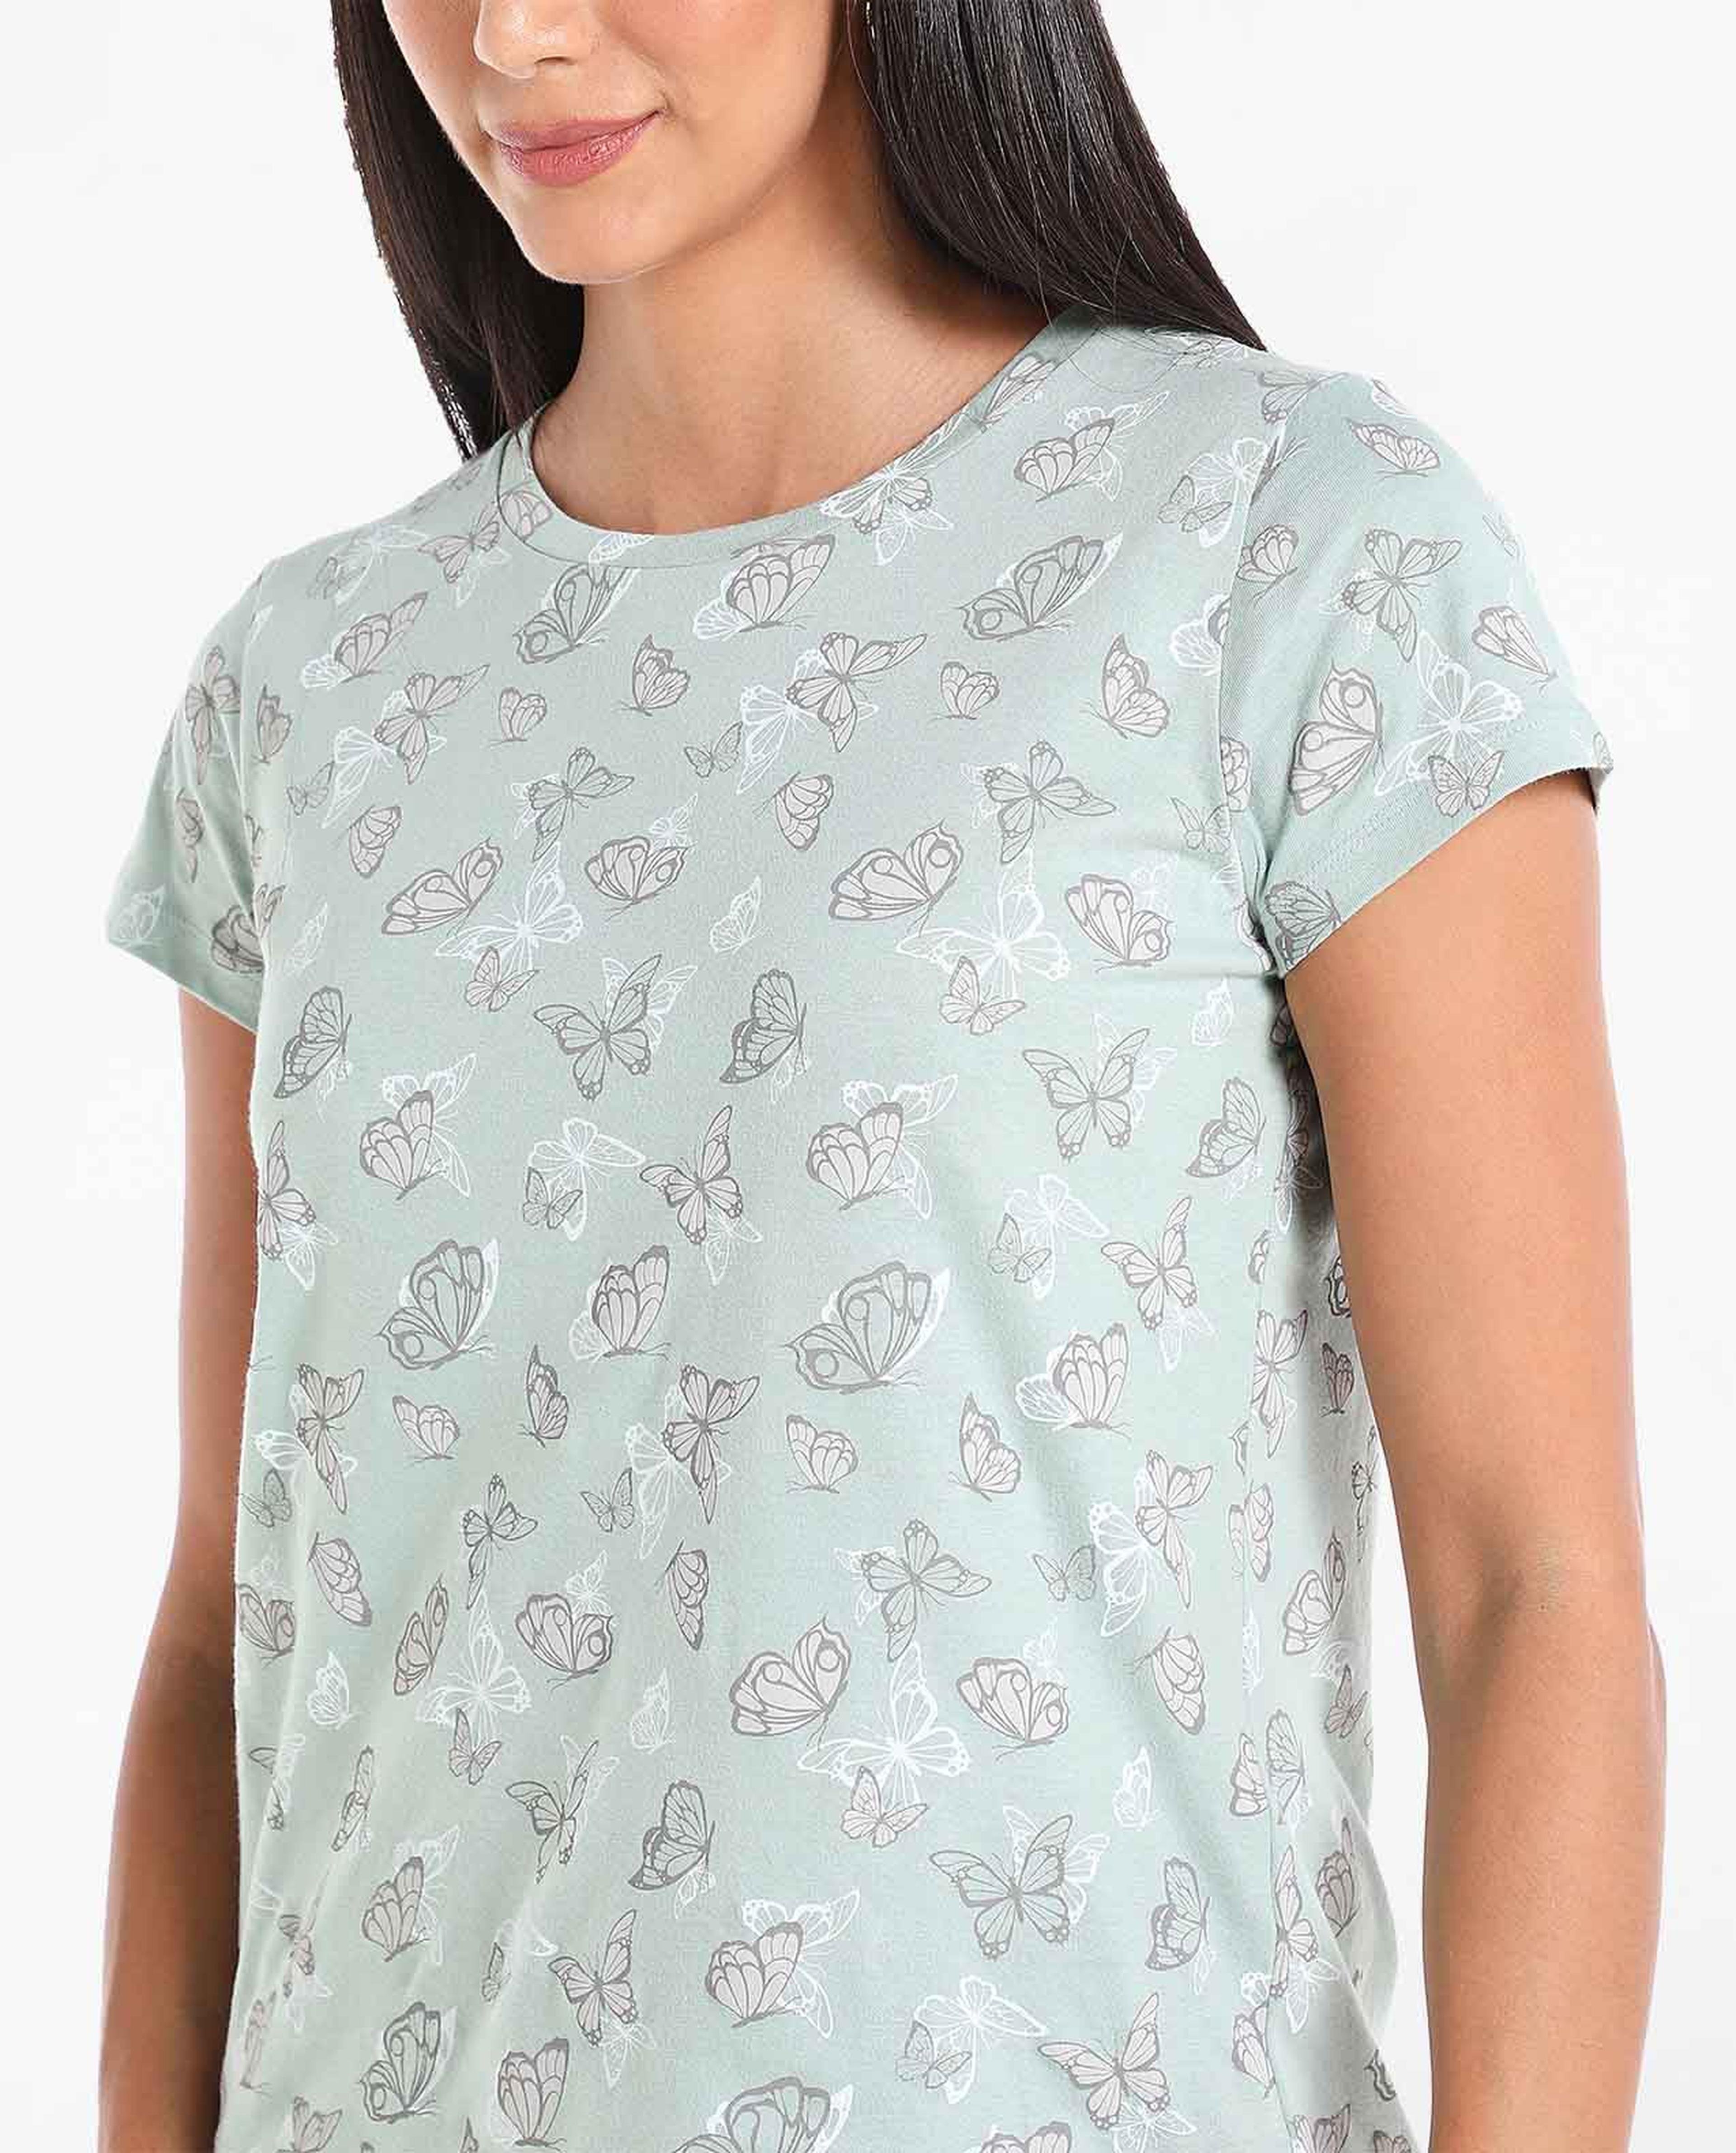 Printed T-Shirt with Round Neck and Short Sleeves